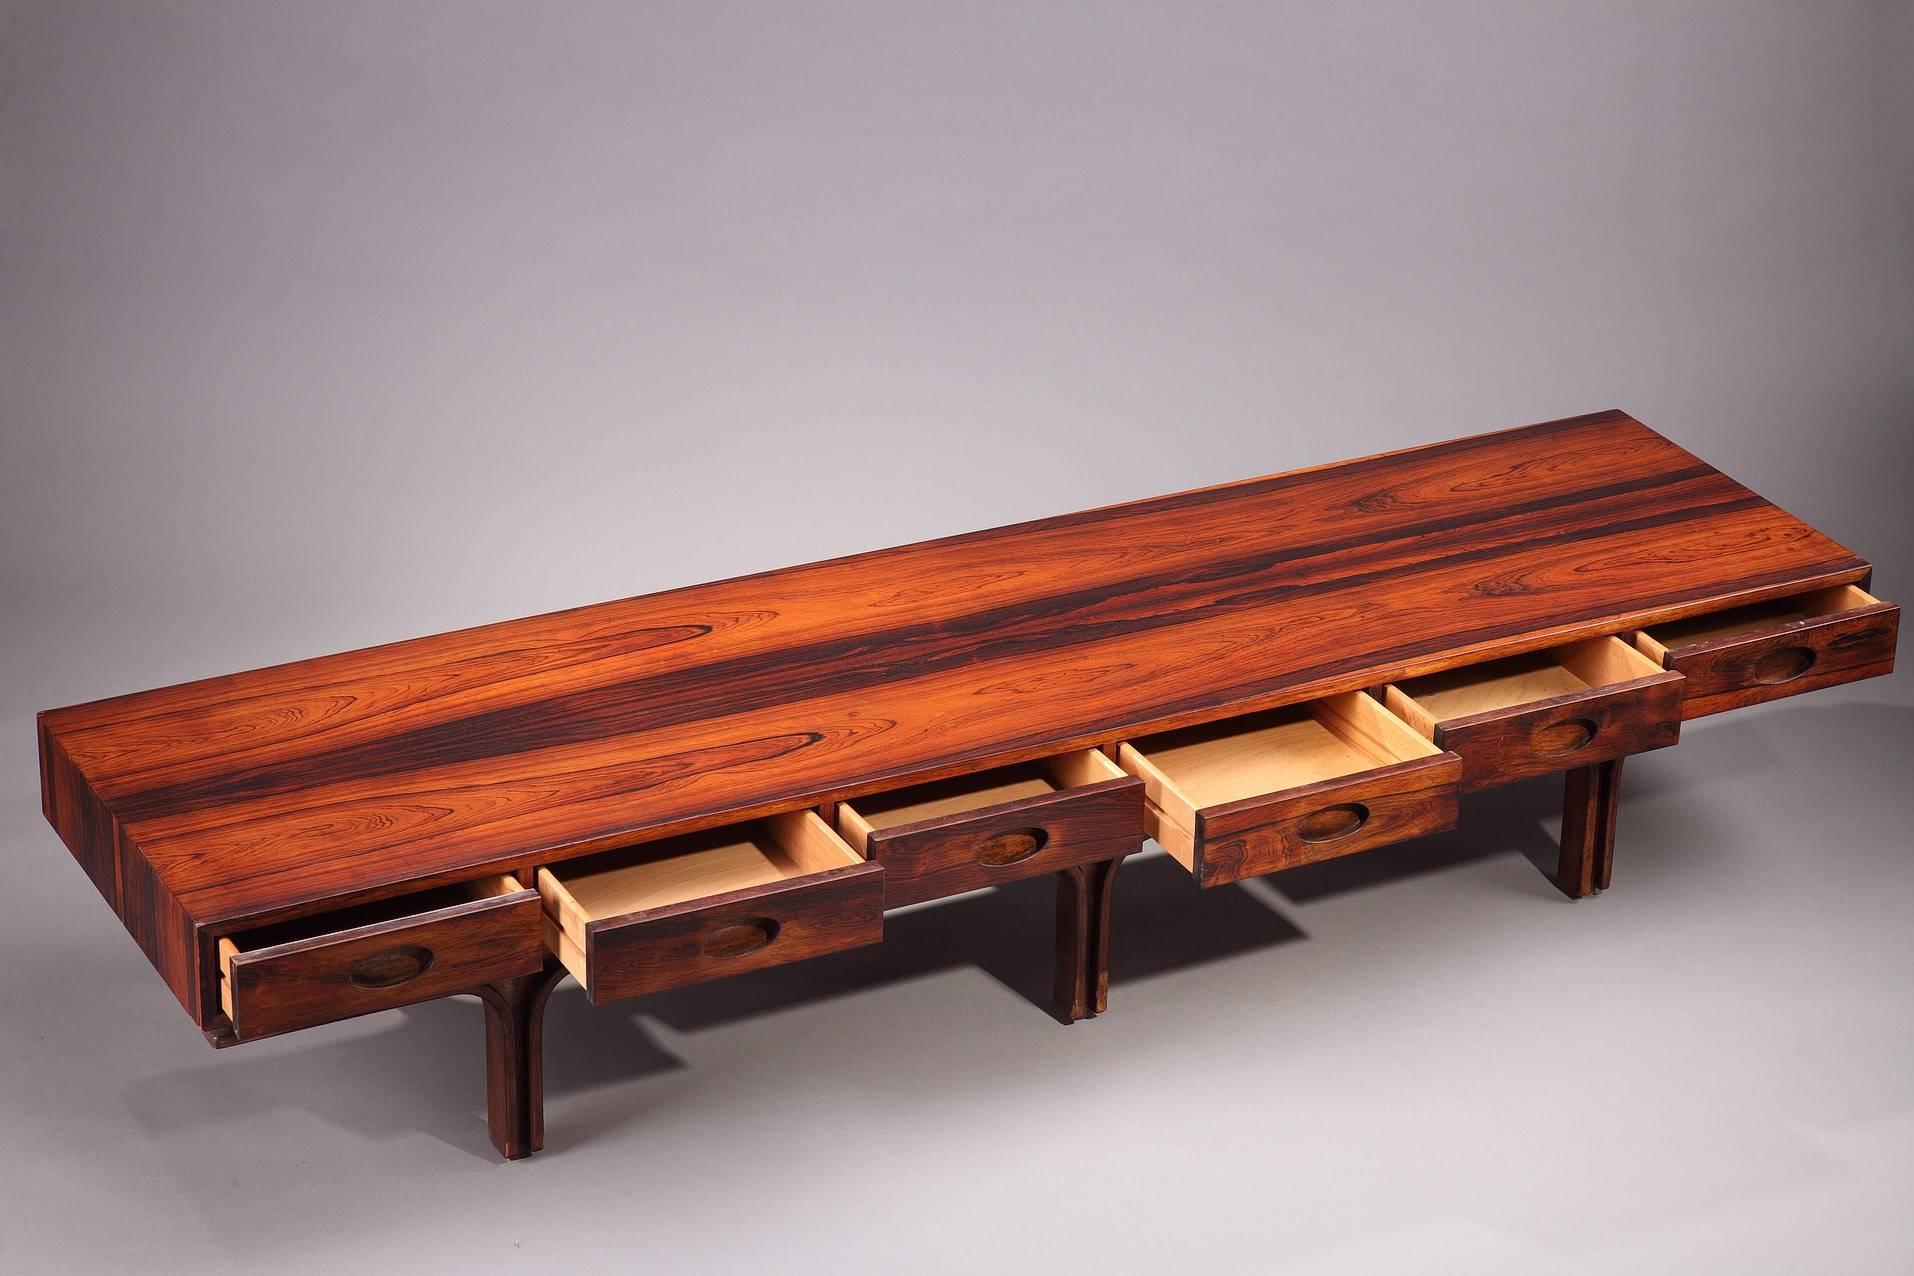 1960s rosewood veneer coffee table with six small drawers by Gianfranco Frattini for Bernini. The model with six drawers is rarely presented. Good vintage condition.

Gianfranco Frattini (1926-2004) was an Italian architect and designer. He is a